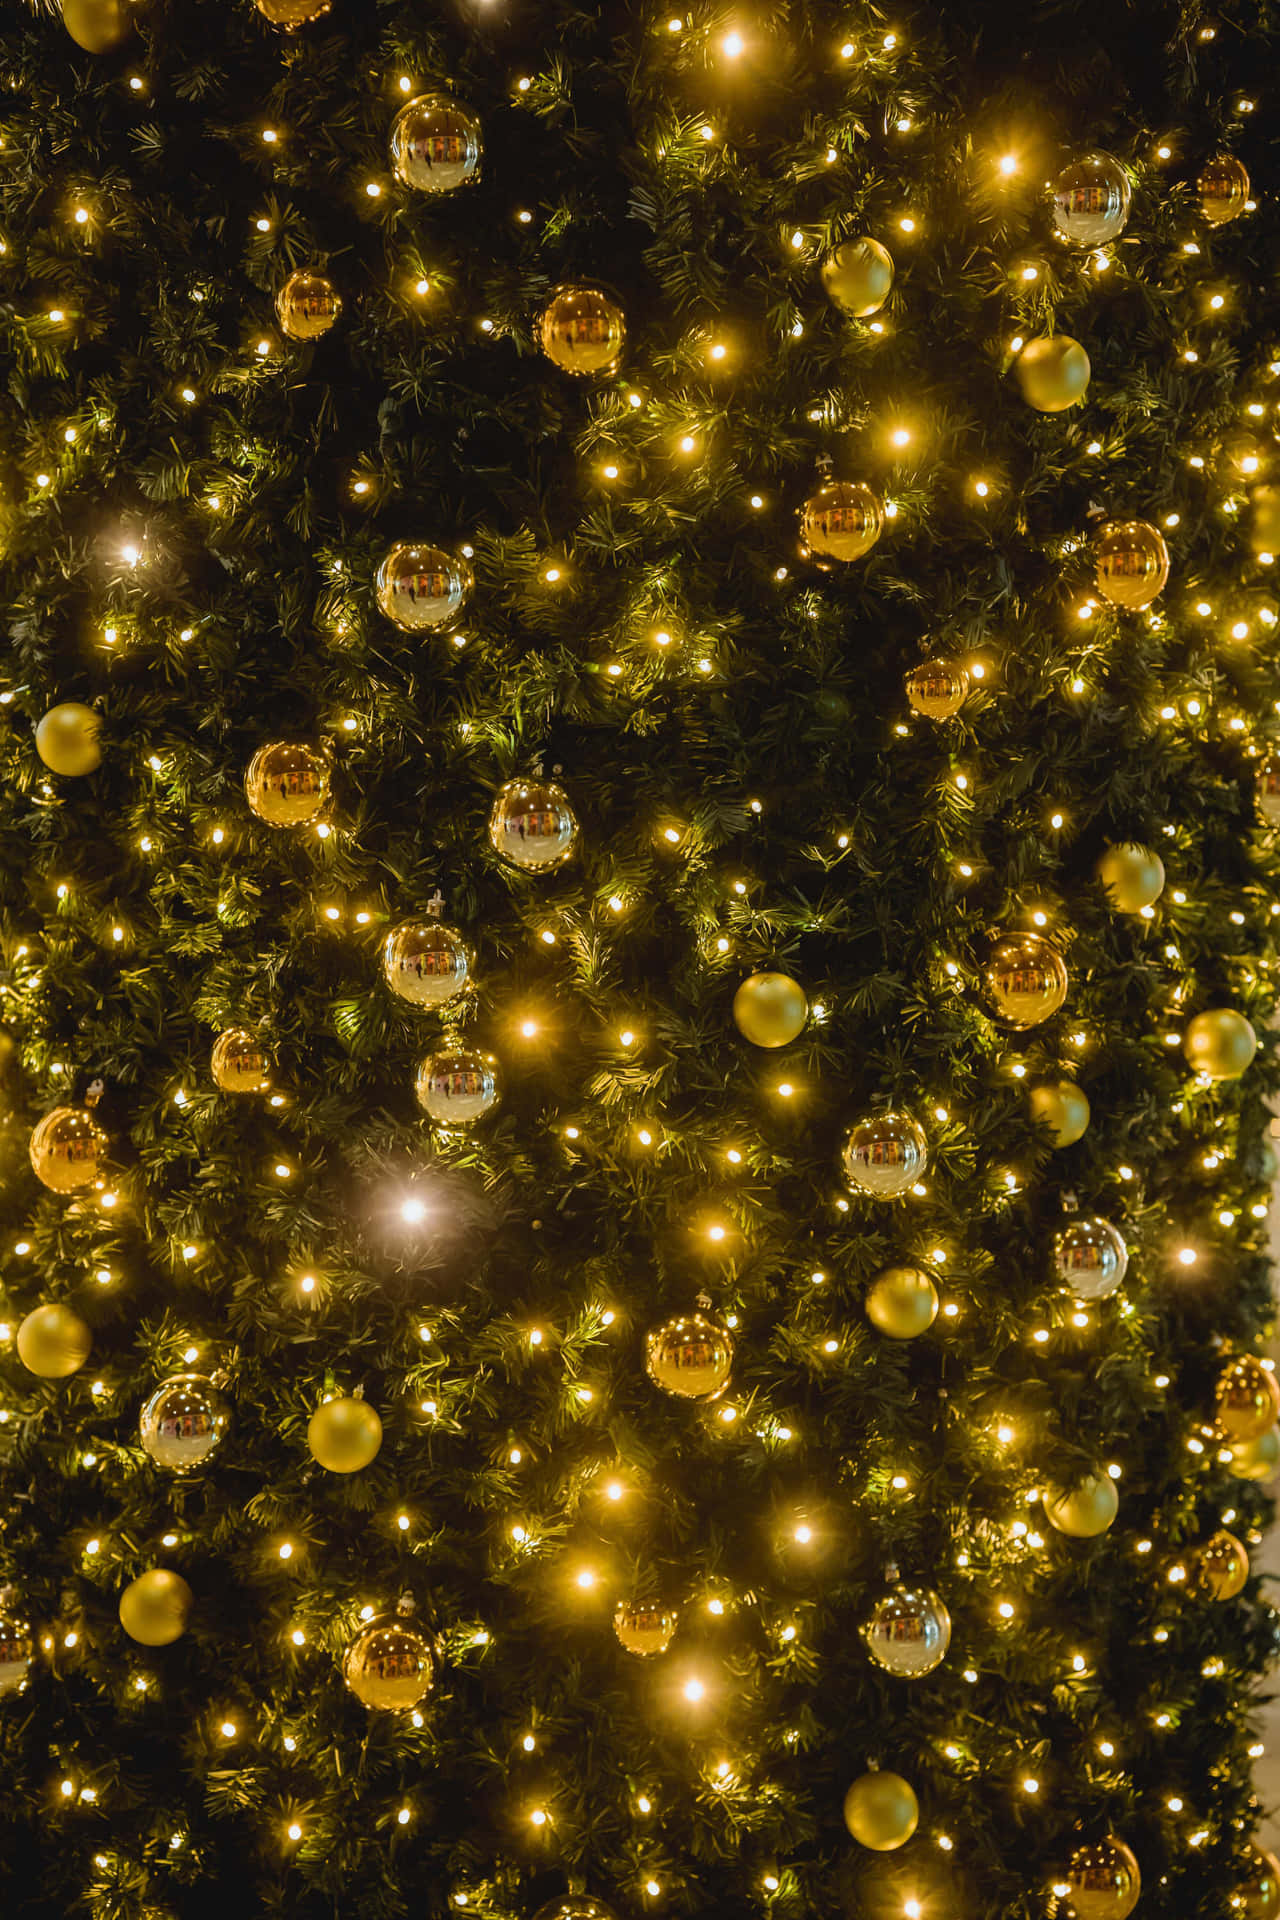 Golden Ball Ornaments And Lights Christmas Photo Background